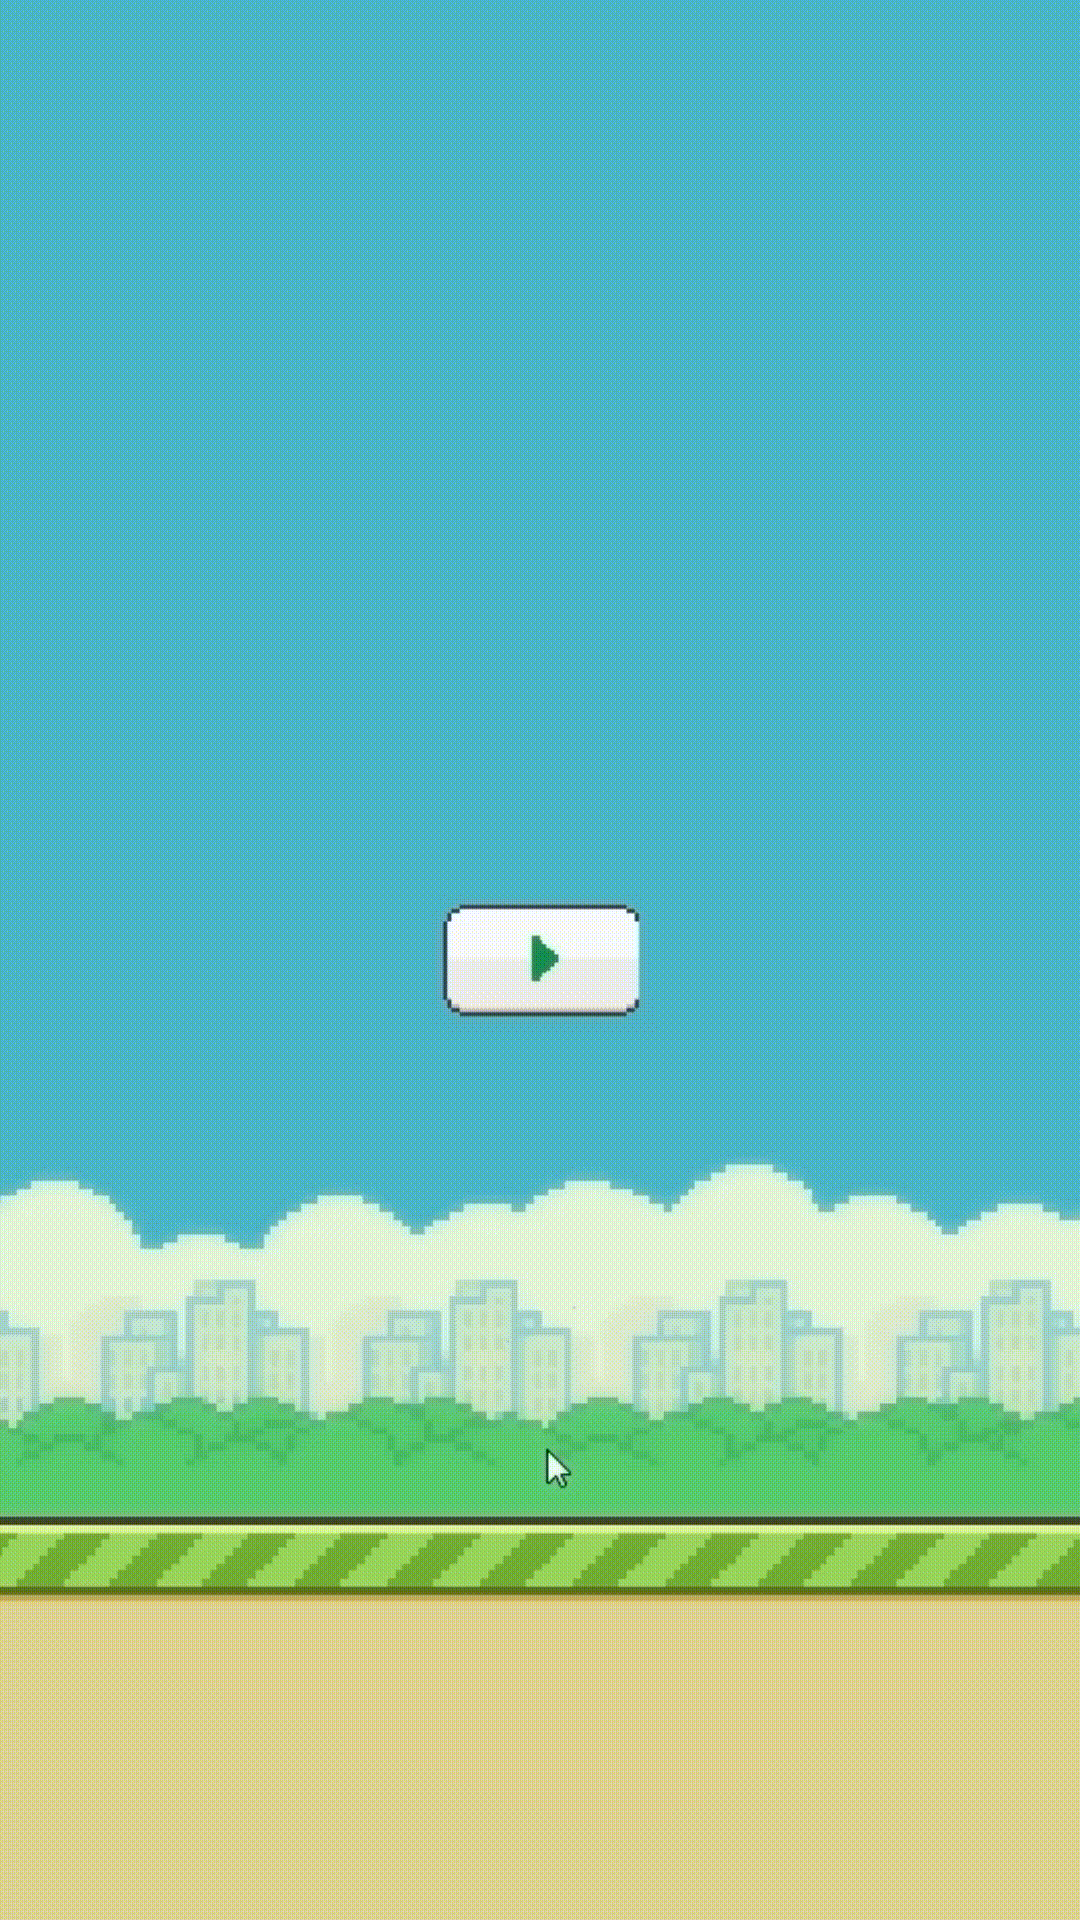 Flappy Bird Game Tutorial Finished